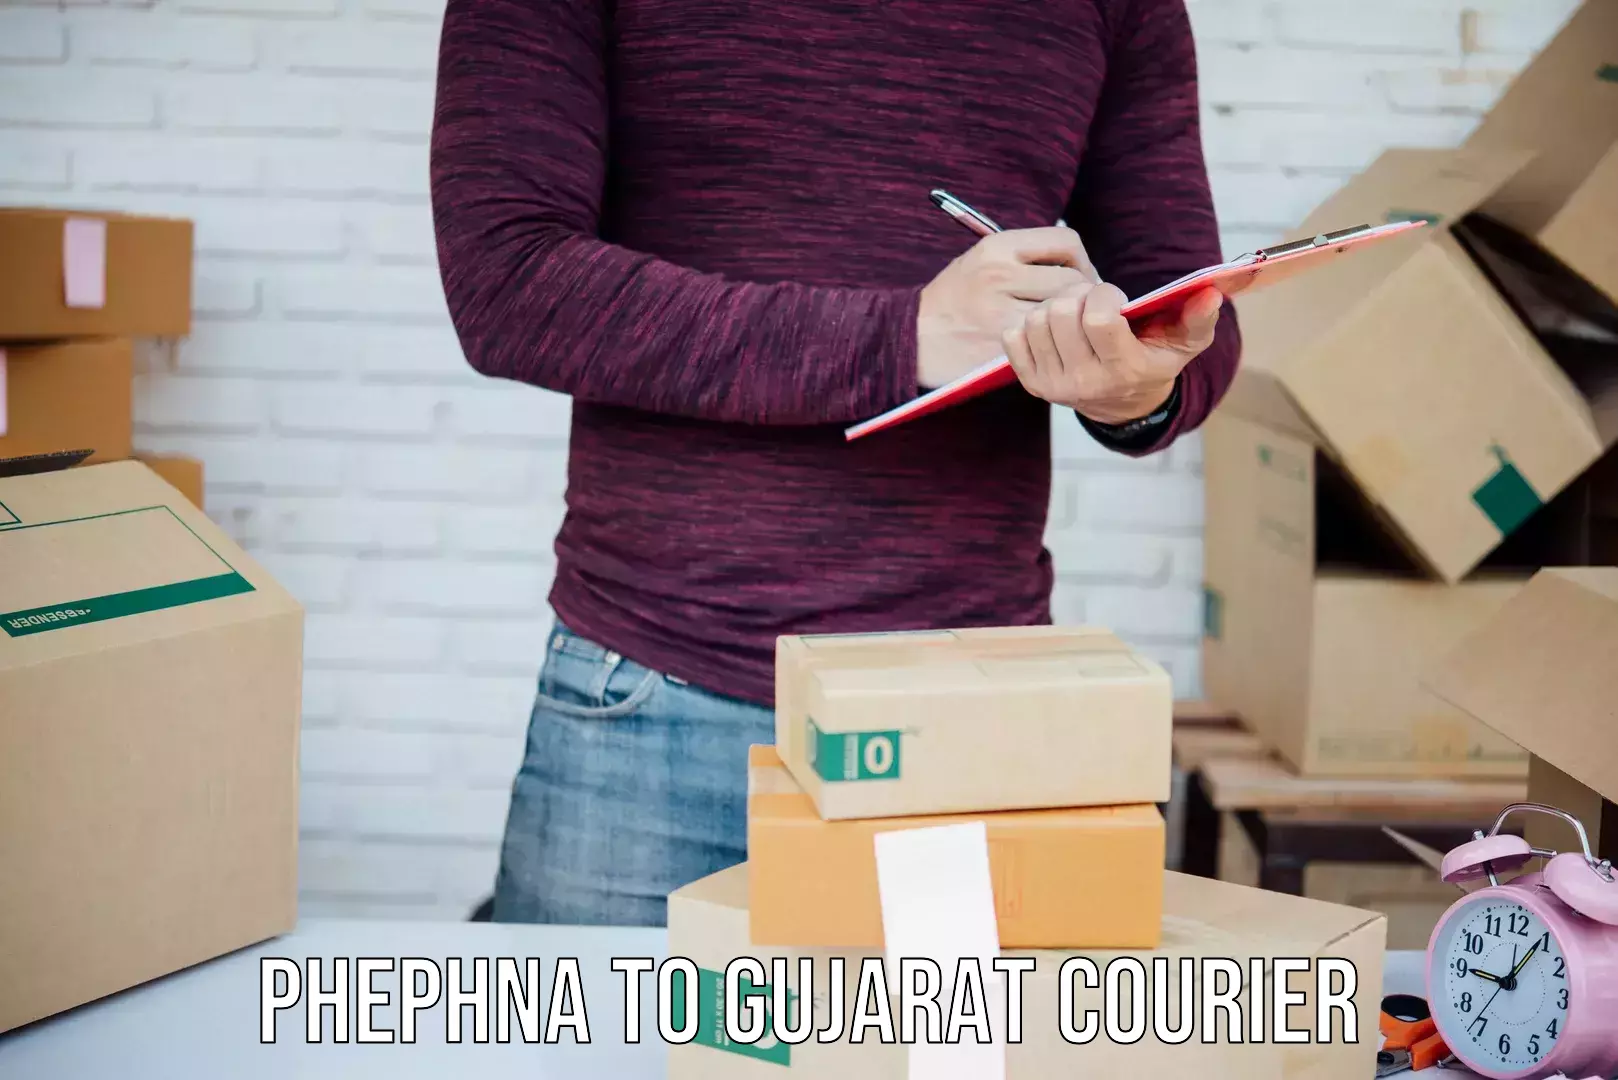 Reliable courier services Phephna to Patan